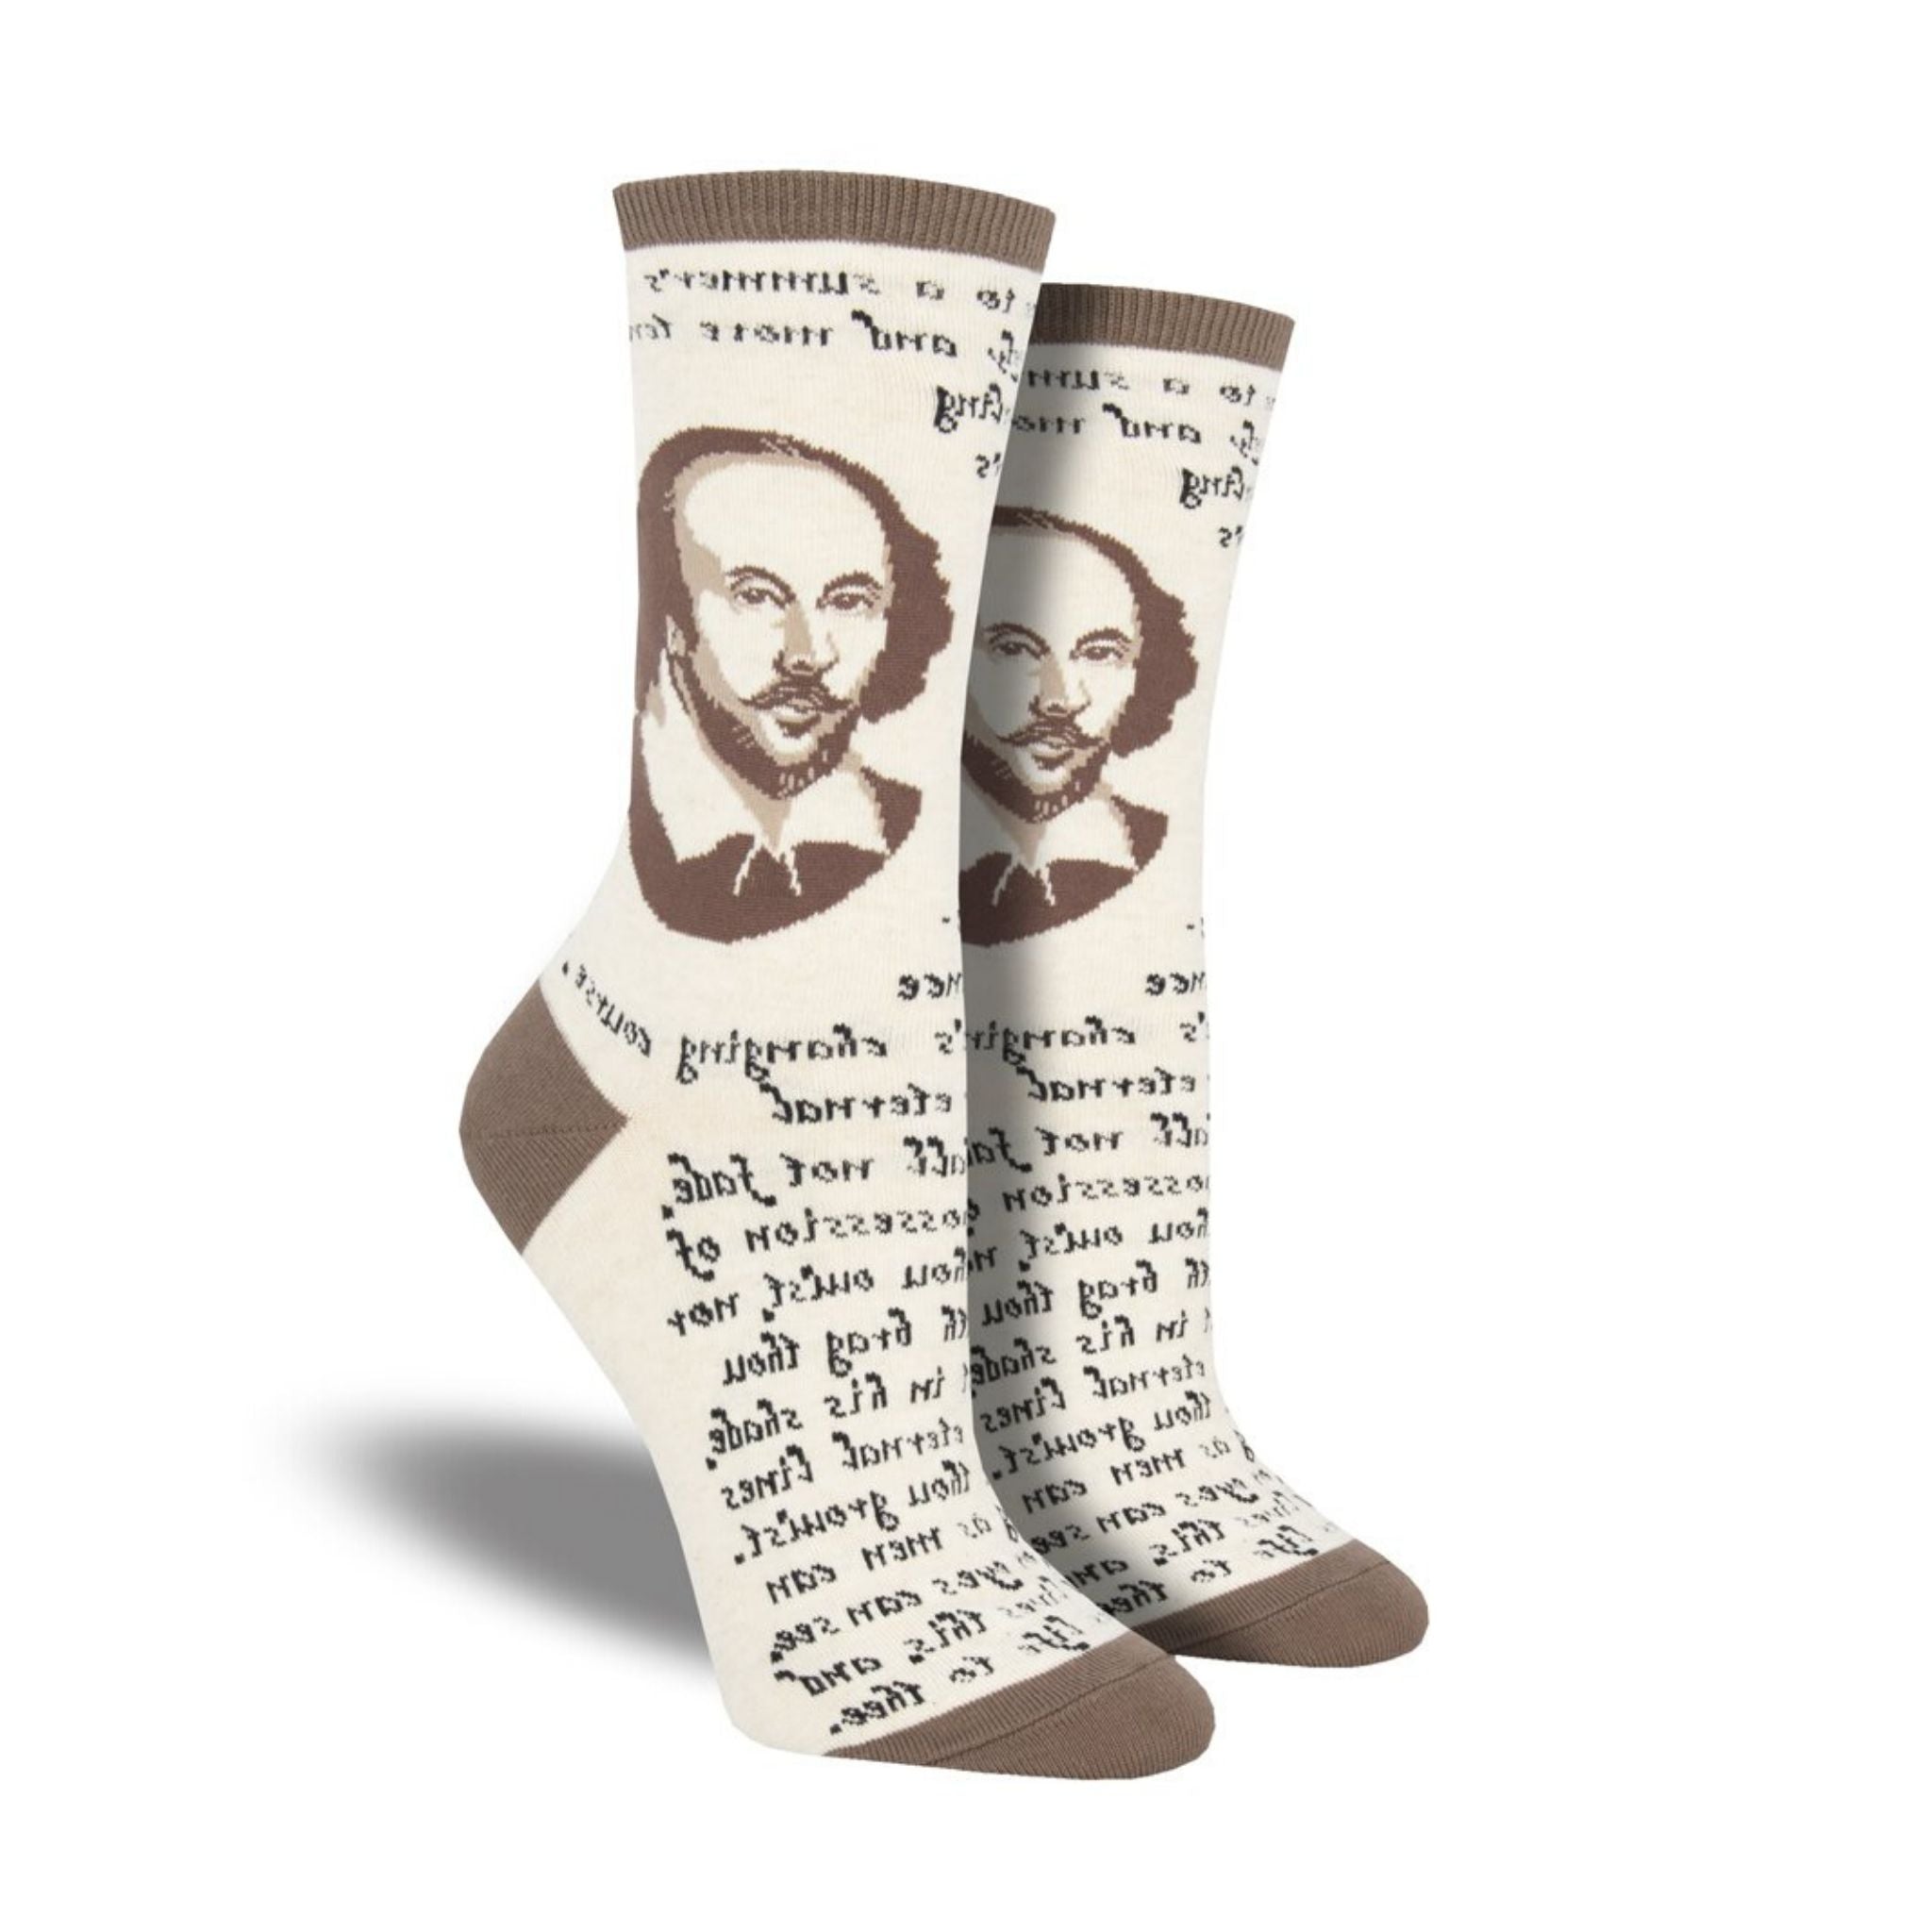 Tan socks with Shakespeare's head and famous quote